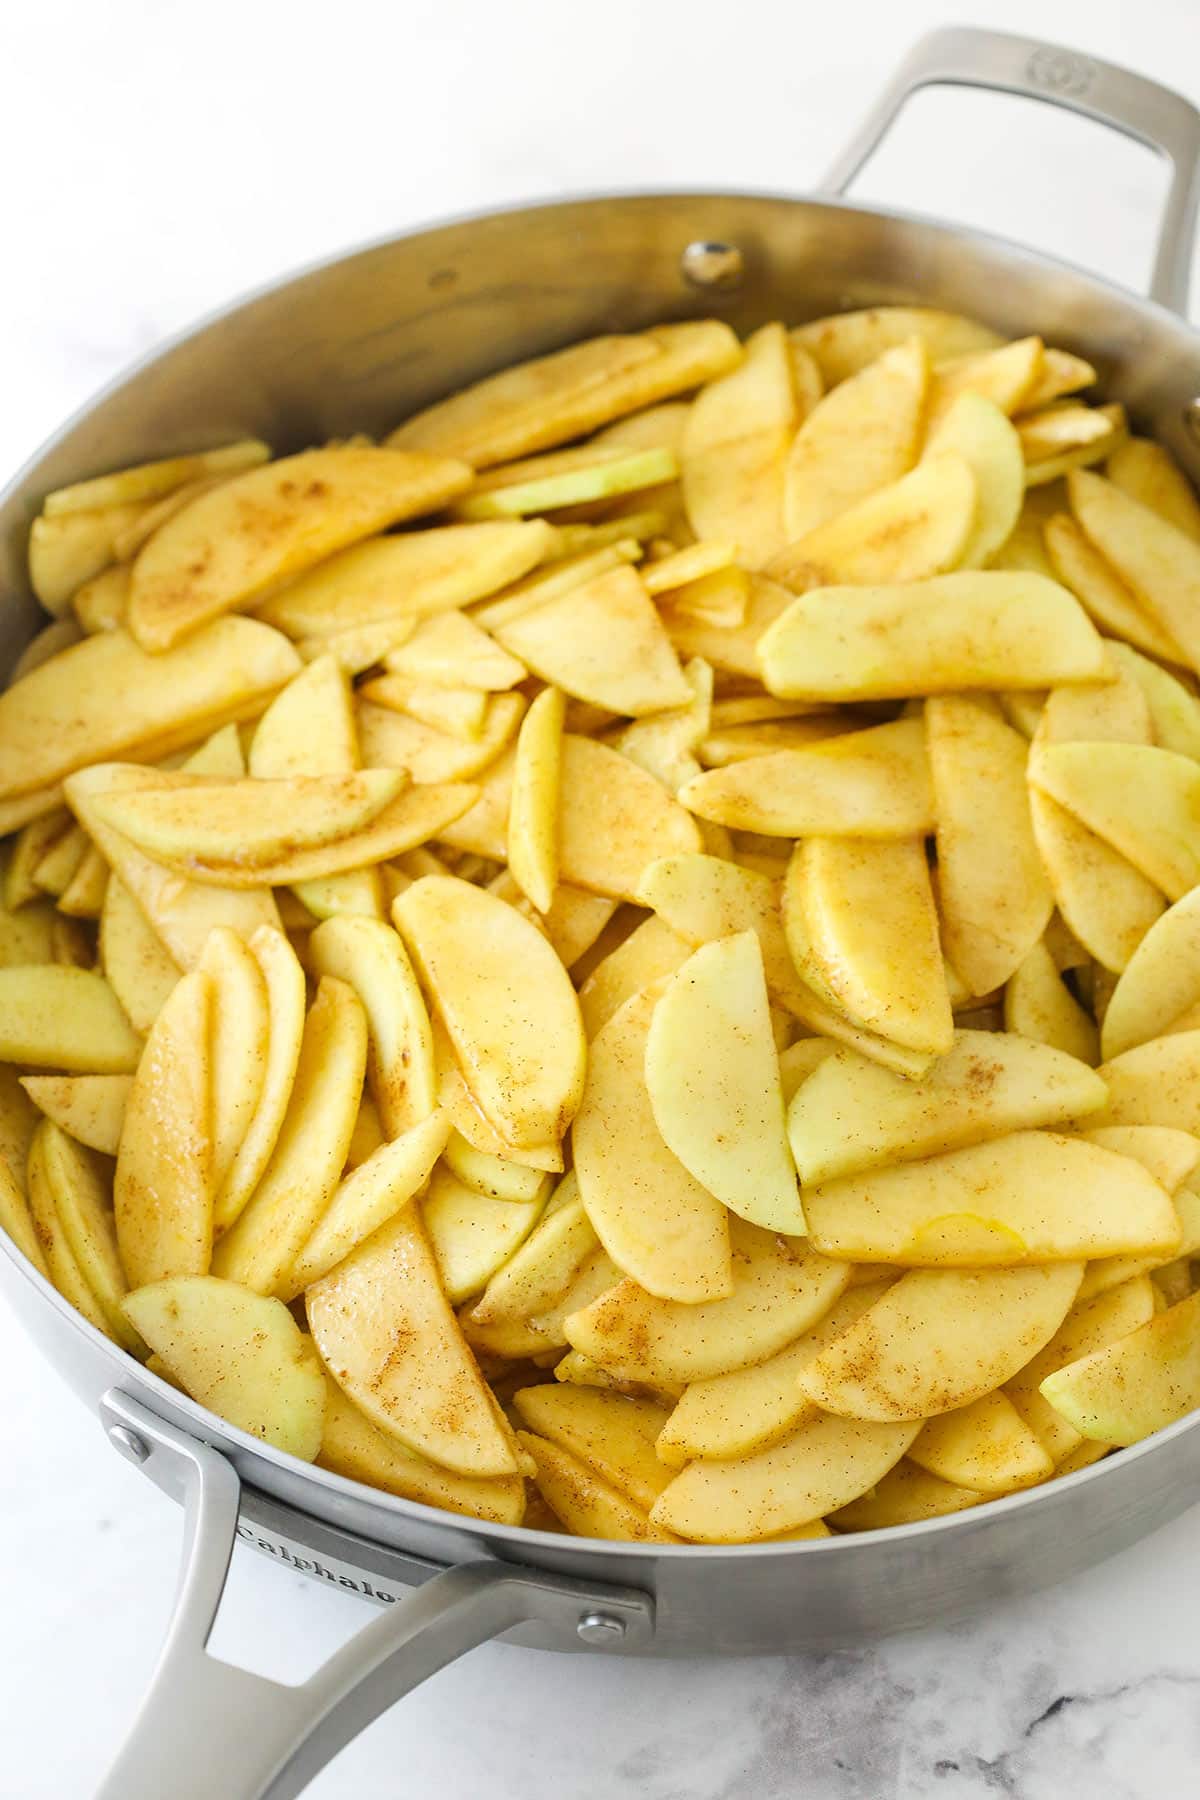 Cooking apple slices in a metal pan.